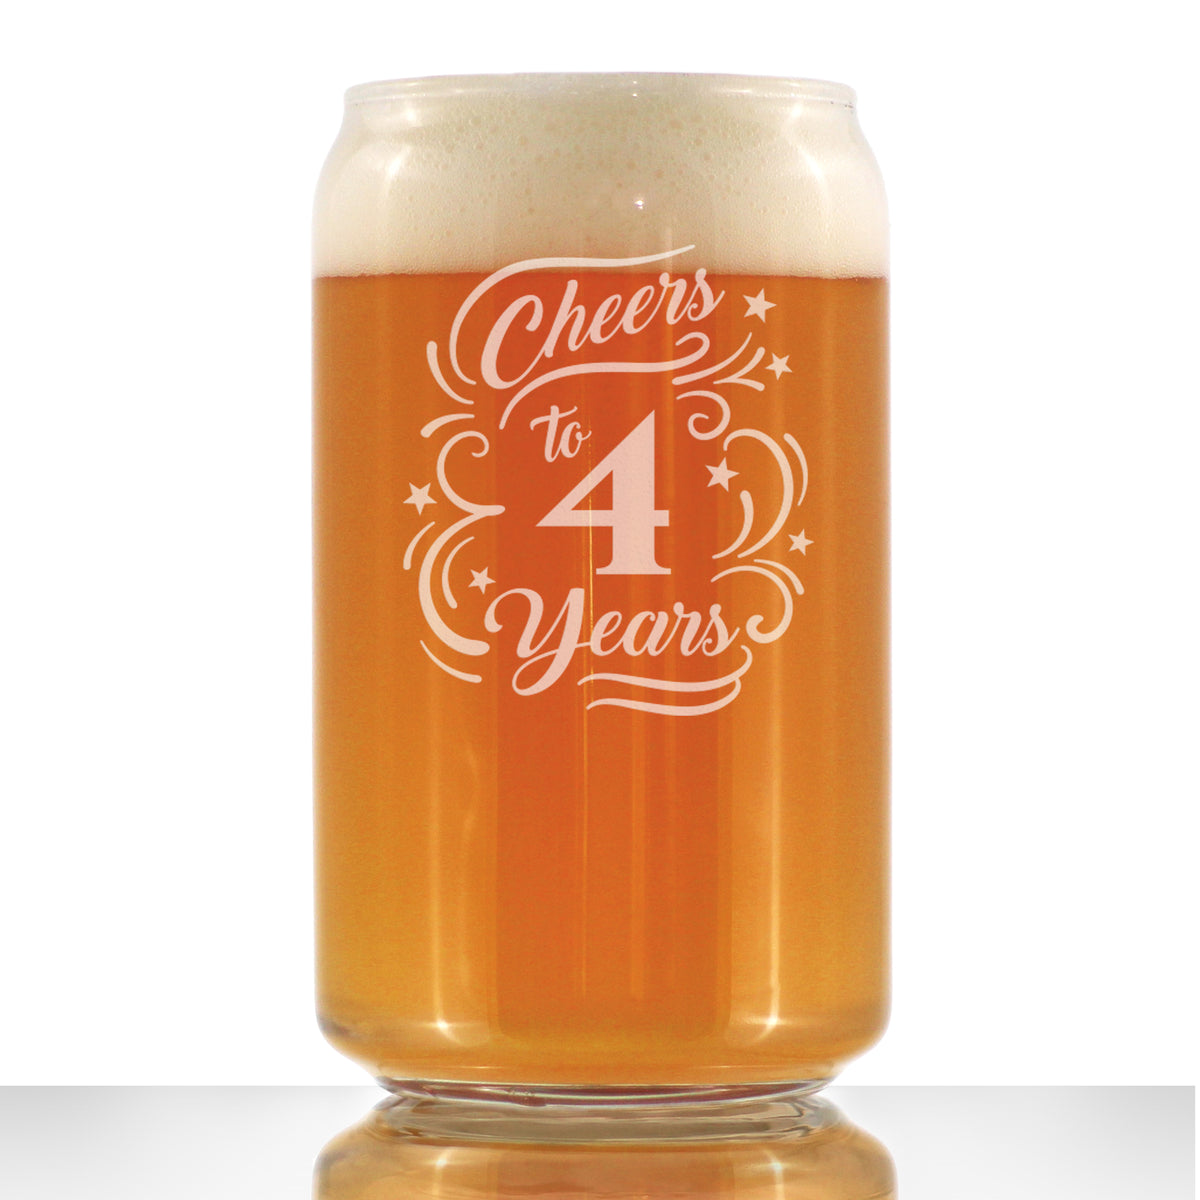 Cheers to 4 Years - Beer Can Pint Glass Gifts for Women &amp; Men - 4th Anniversary Party Decor - 16 Oz Glasses